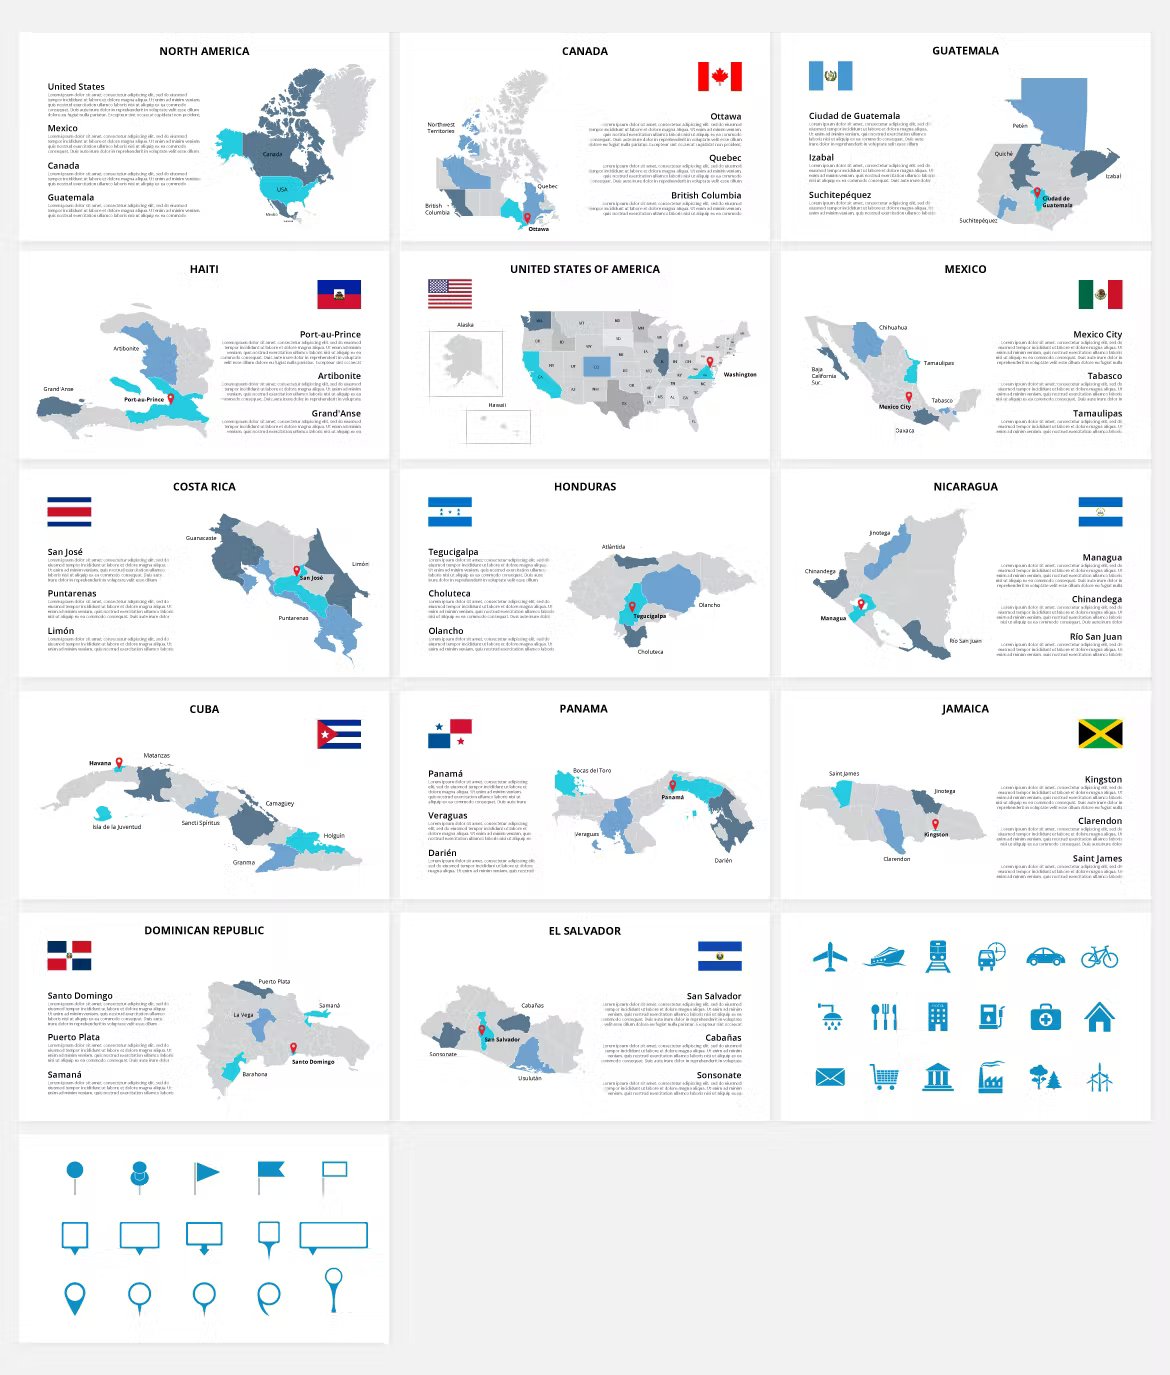 A set of 16 different animated north america maps powerpoint templates in gray, blue and white on a gray background.